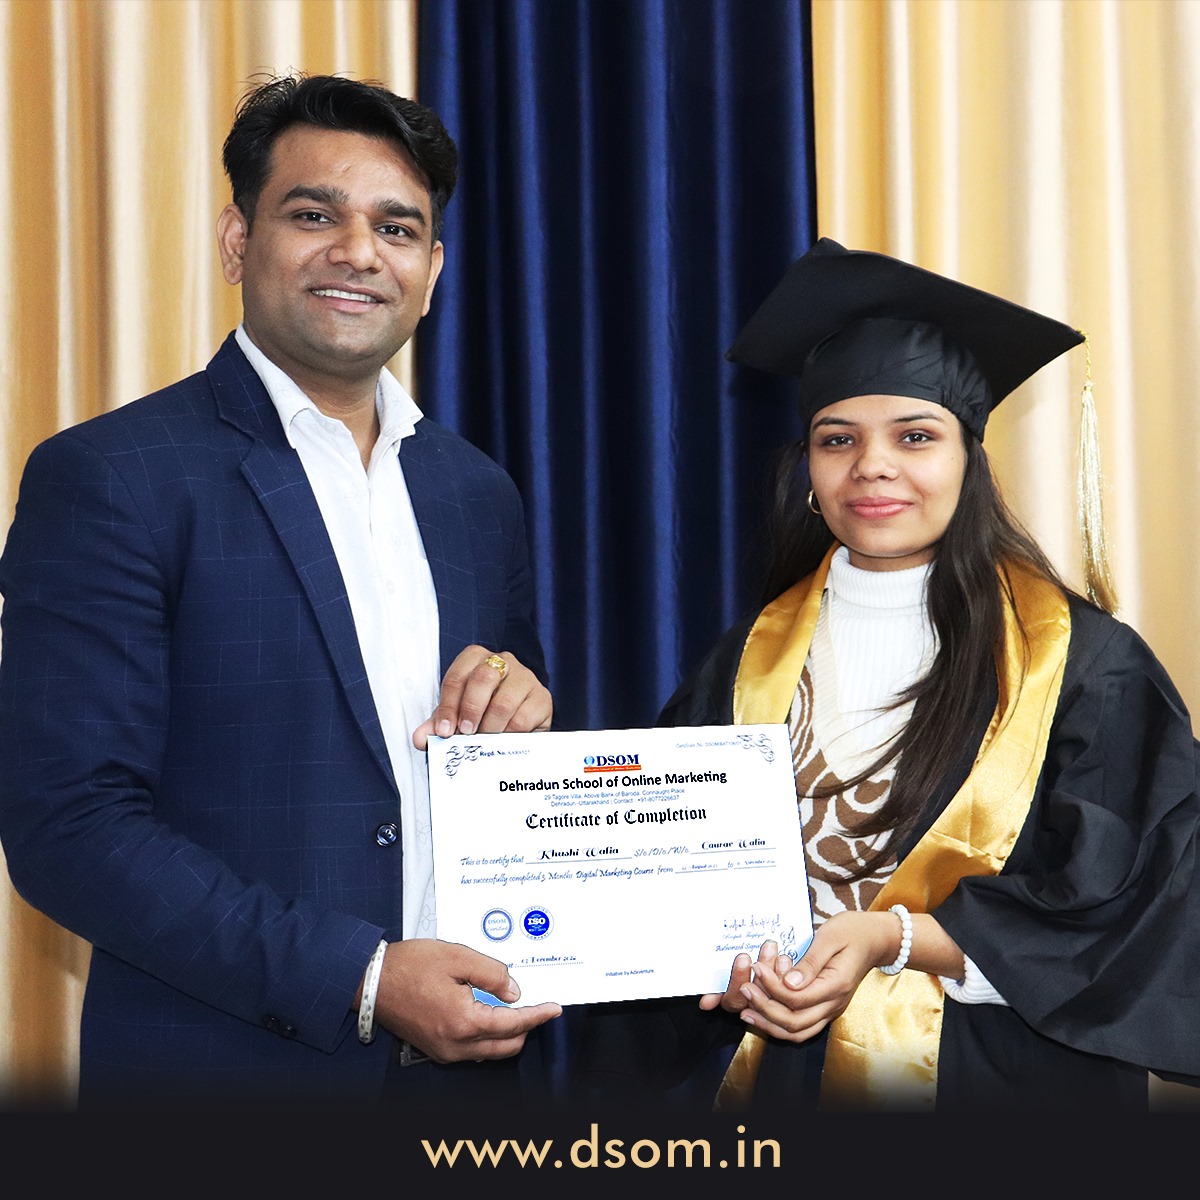 Today is your day- a day we celebrate the uniqueness and wonderful person you've to become. 
Best of luck for your future.
.
.
.
.
#celebratingyou #bestwishes #congratulations #brightfuture #dsom #certificatecermony #dsomlife